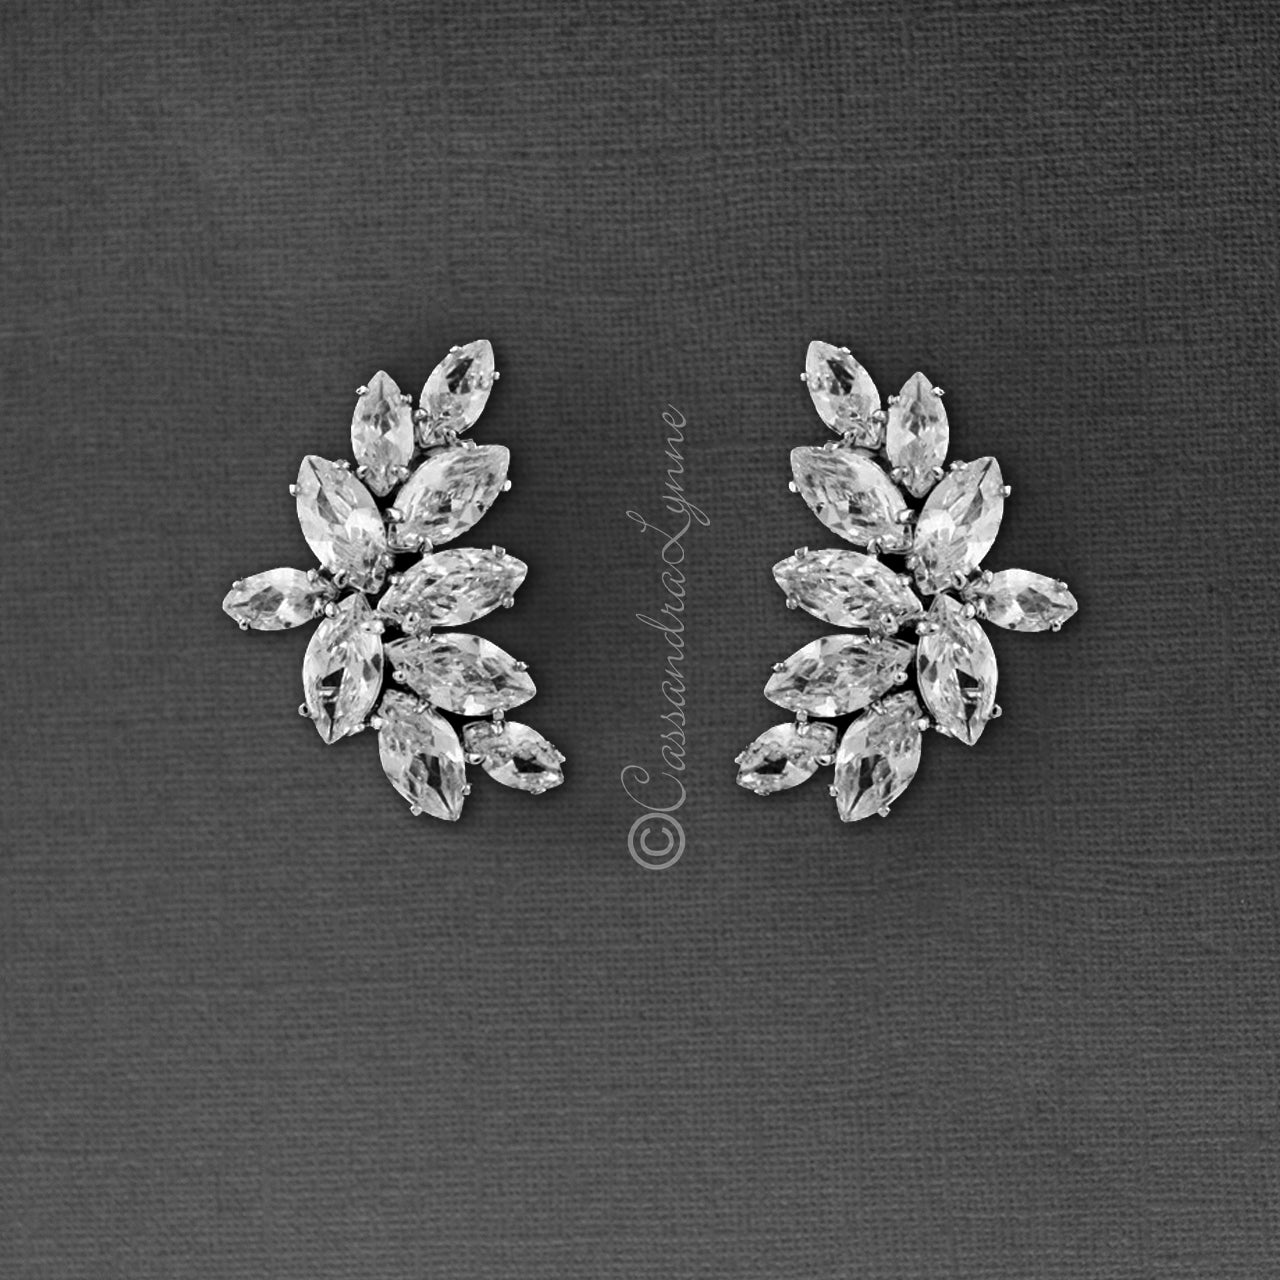 CZ Bridal Earrings of Marquise Leaf Clusters